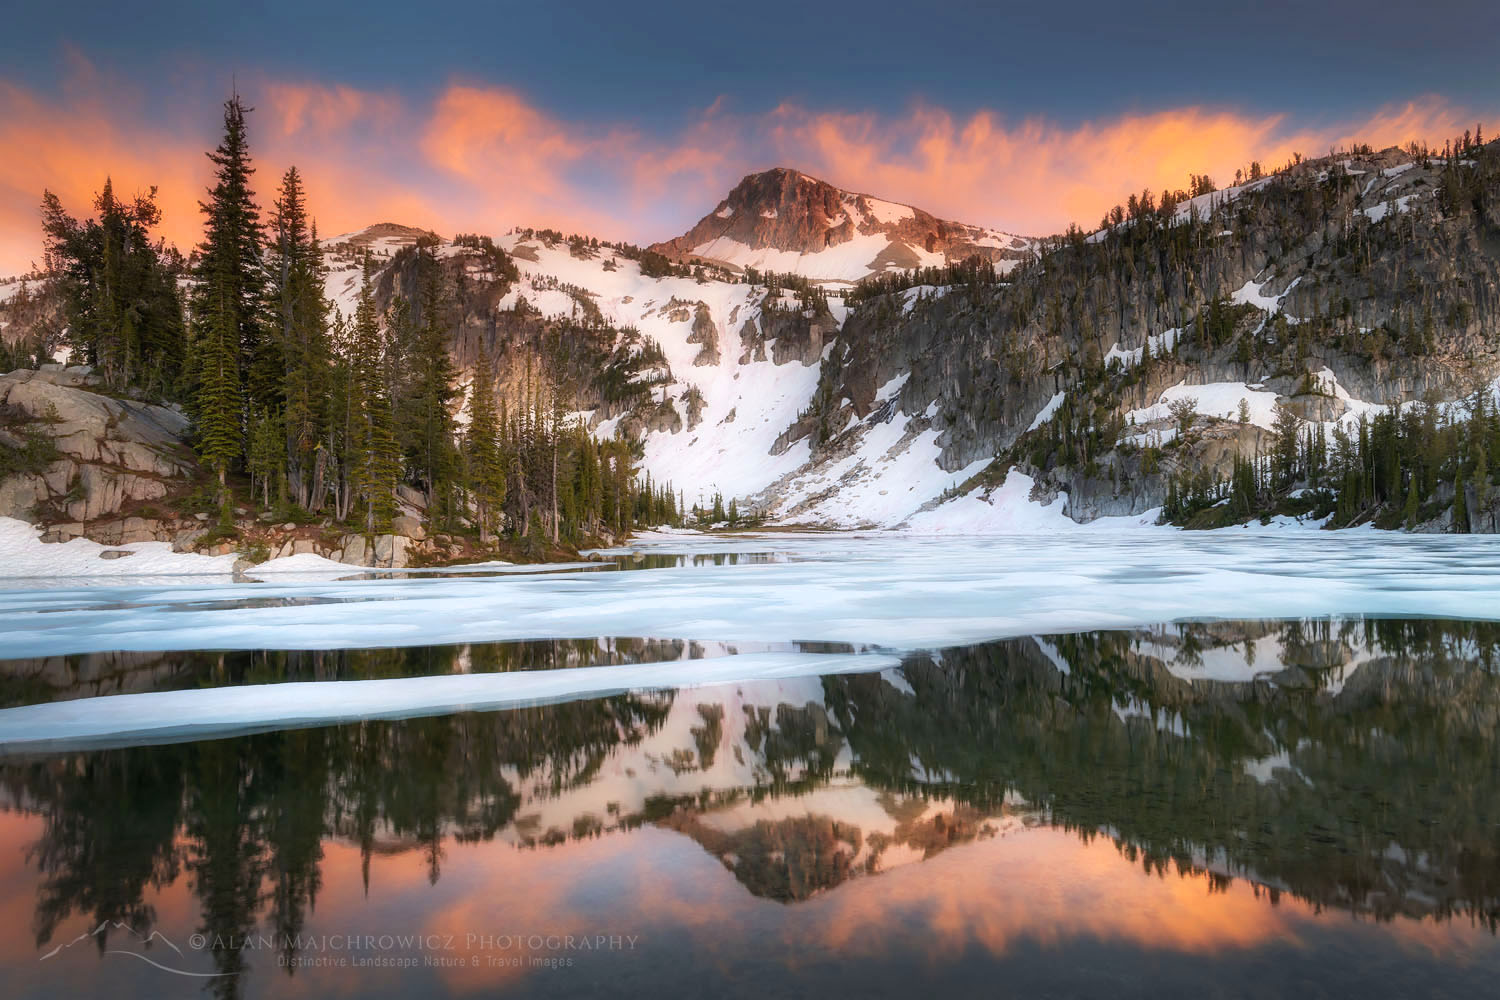 Alpenglow over Eagle Cap reflected in Mirror Lake, Eagle Cap Wilderness, Wallowa Mountains, Oregon #68794or